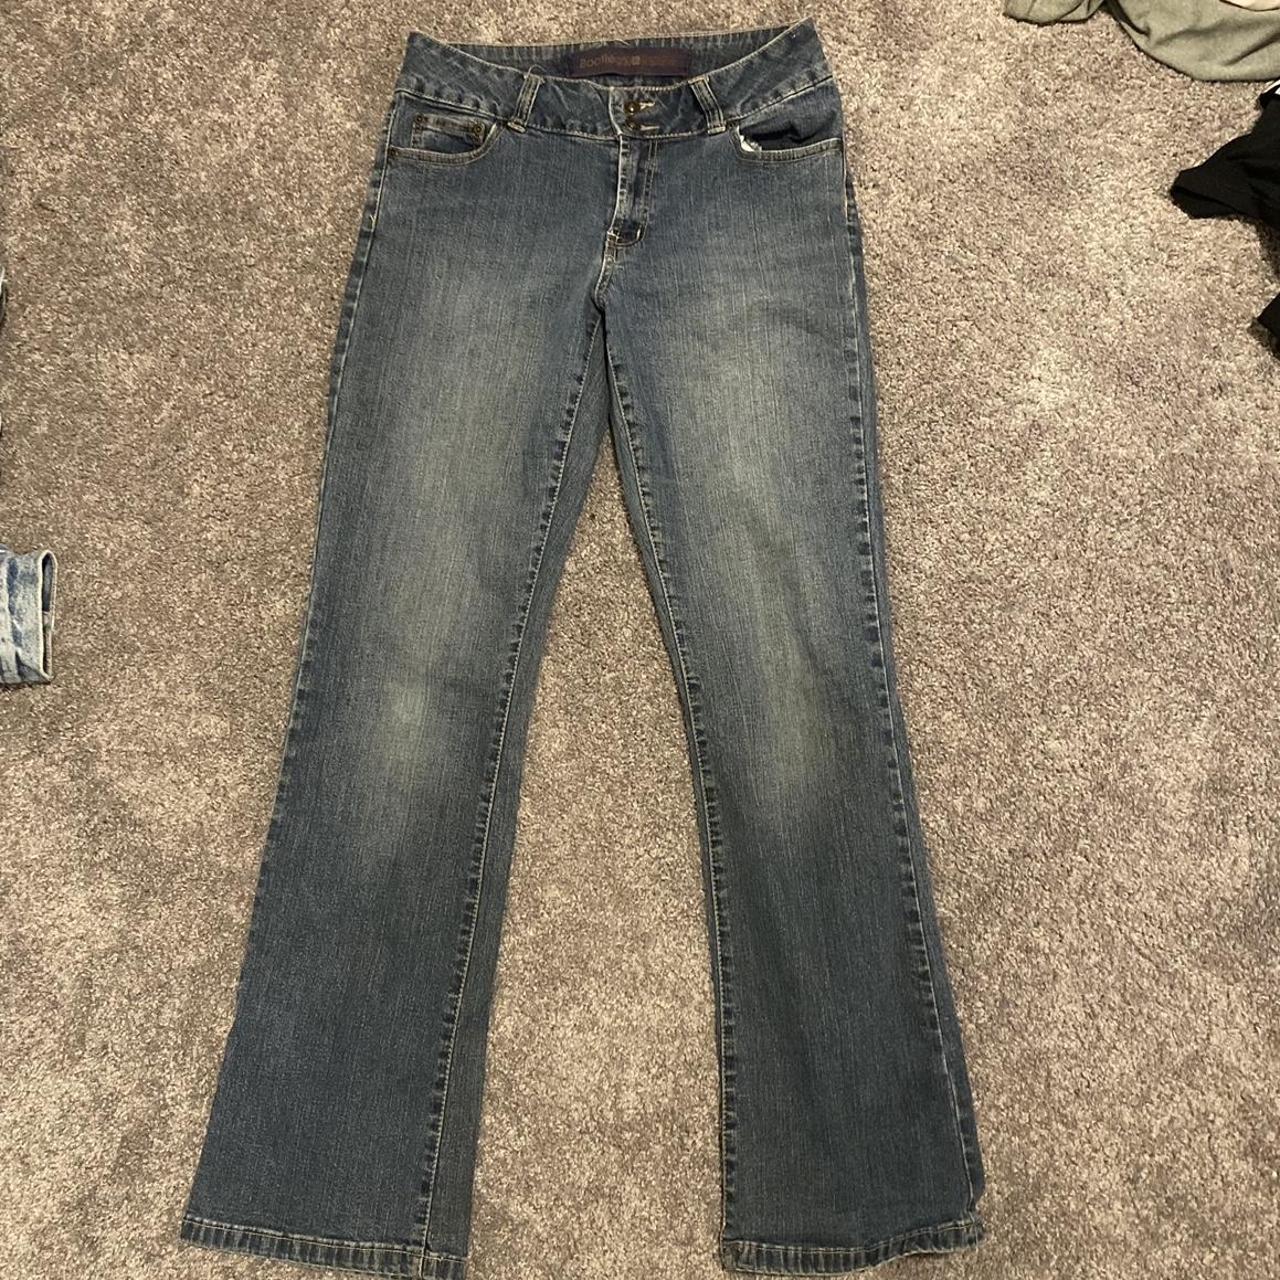 low rise flared jeans - Depop